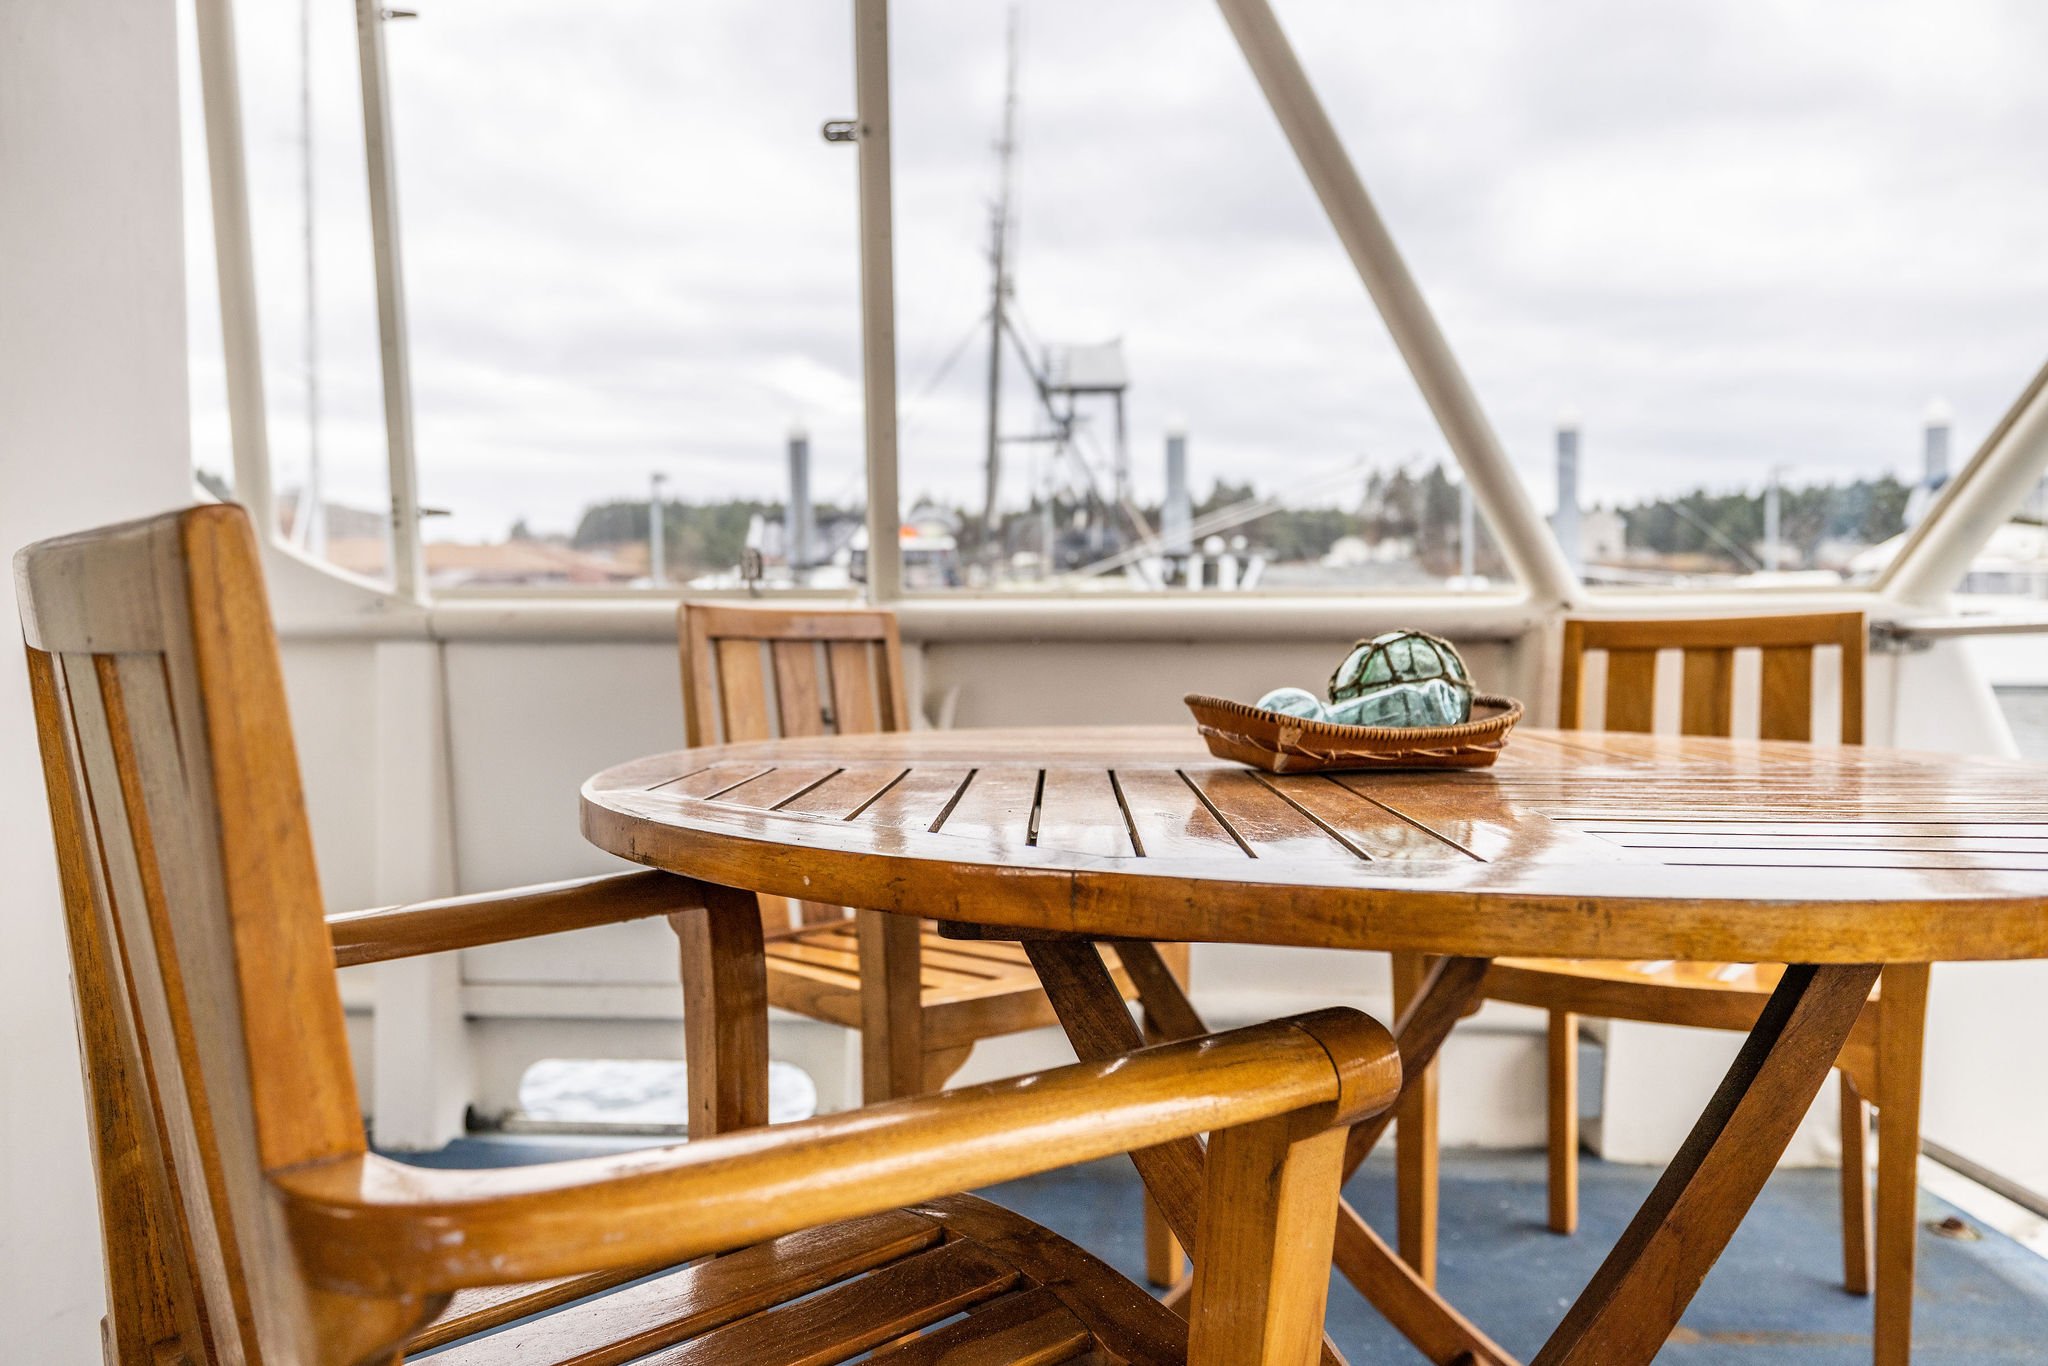 Teak dining table and chairs on the back deck of the Silver Lady.